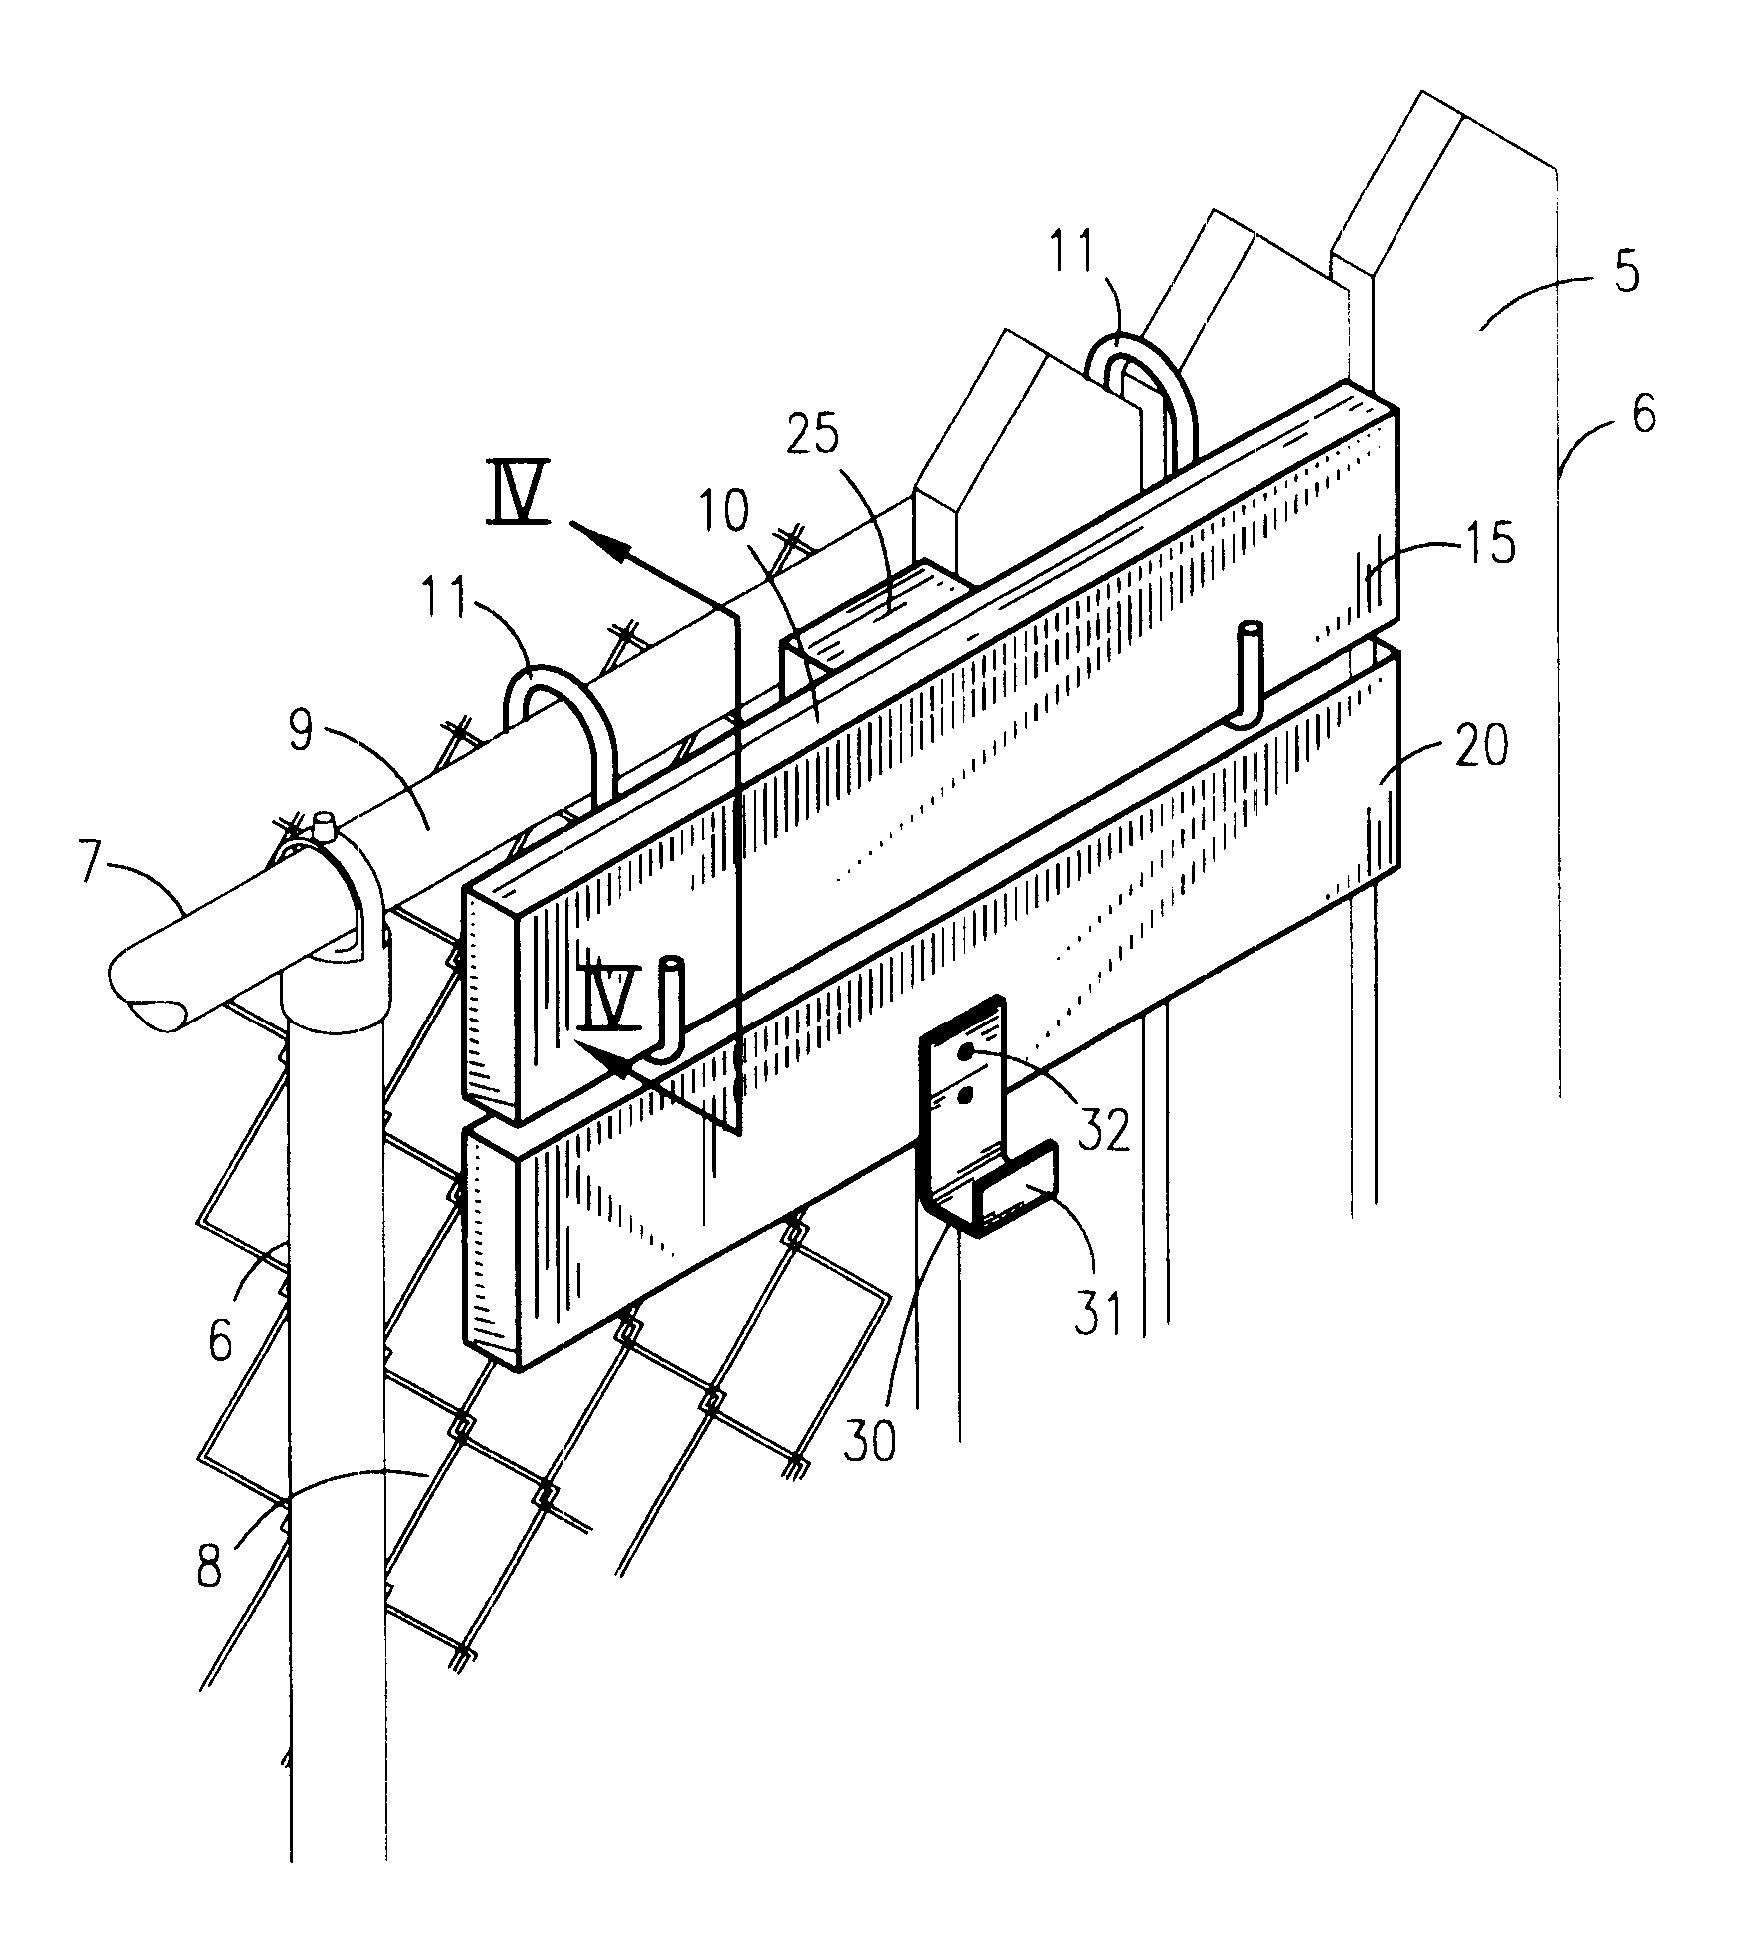 Article holder adapted for being supported by a fence